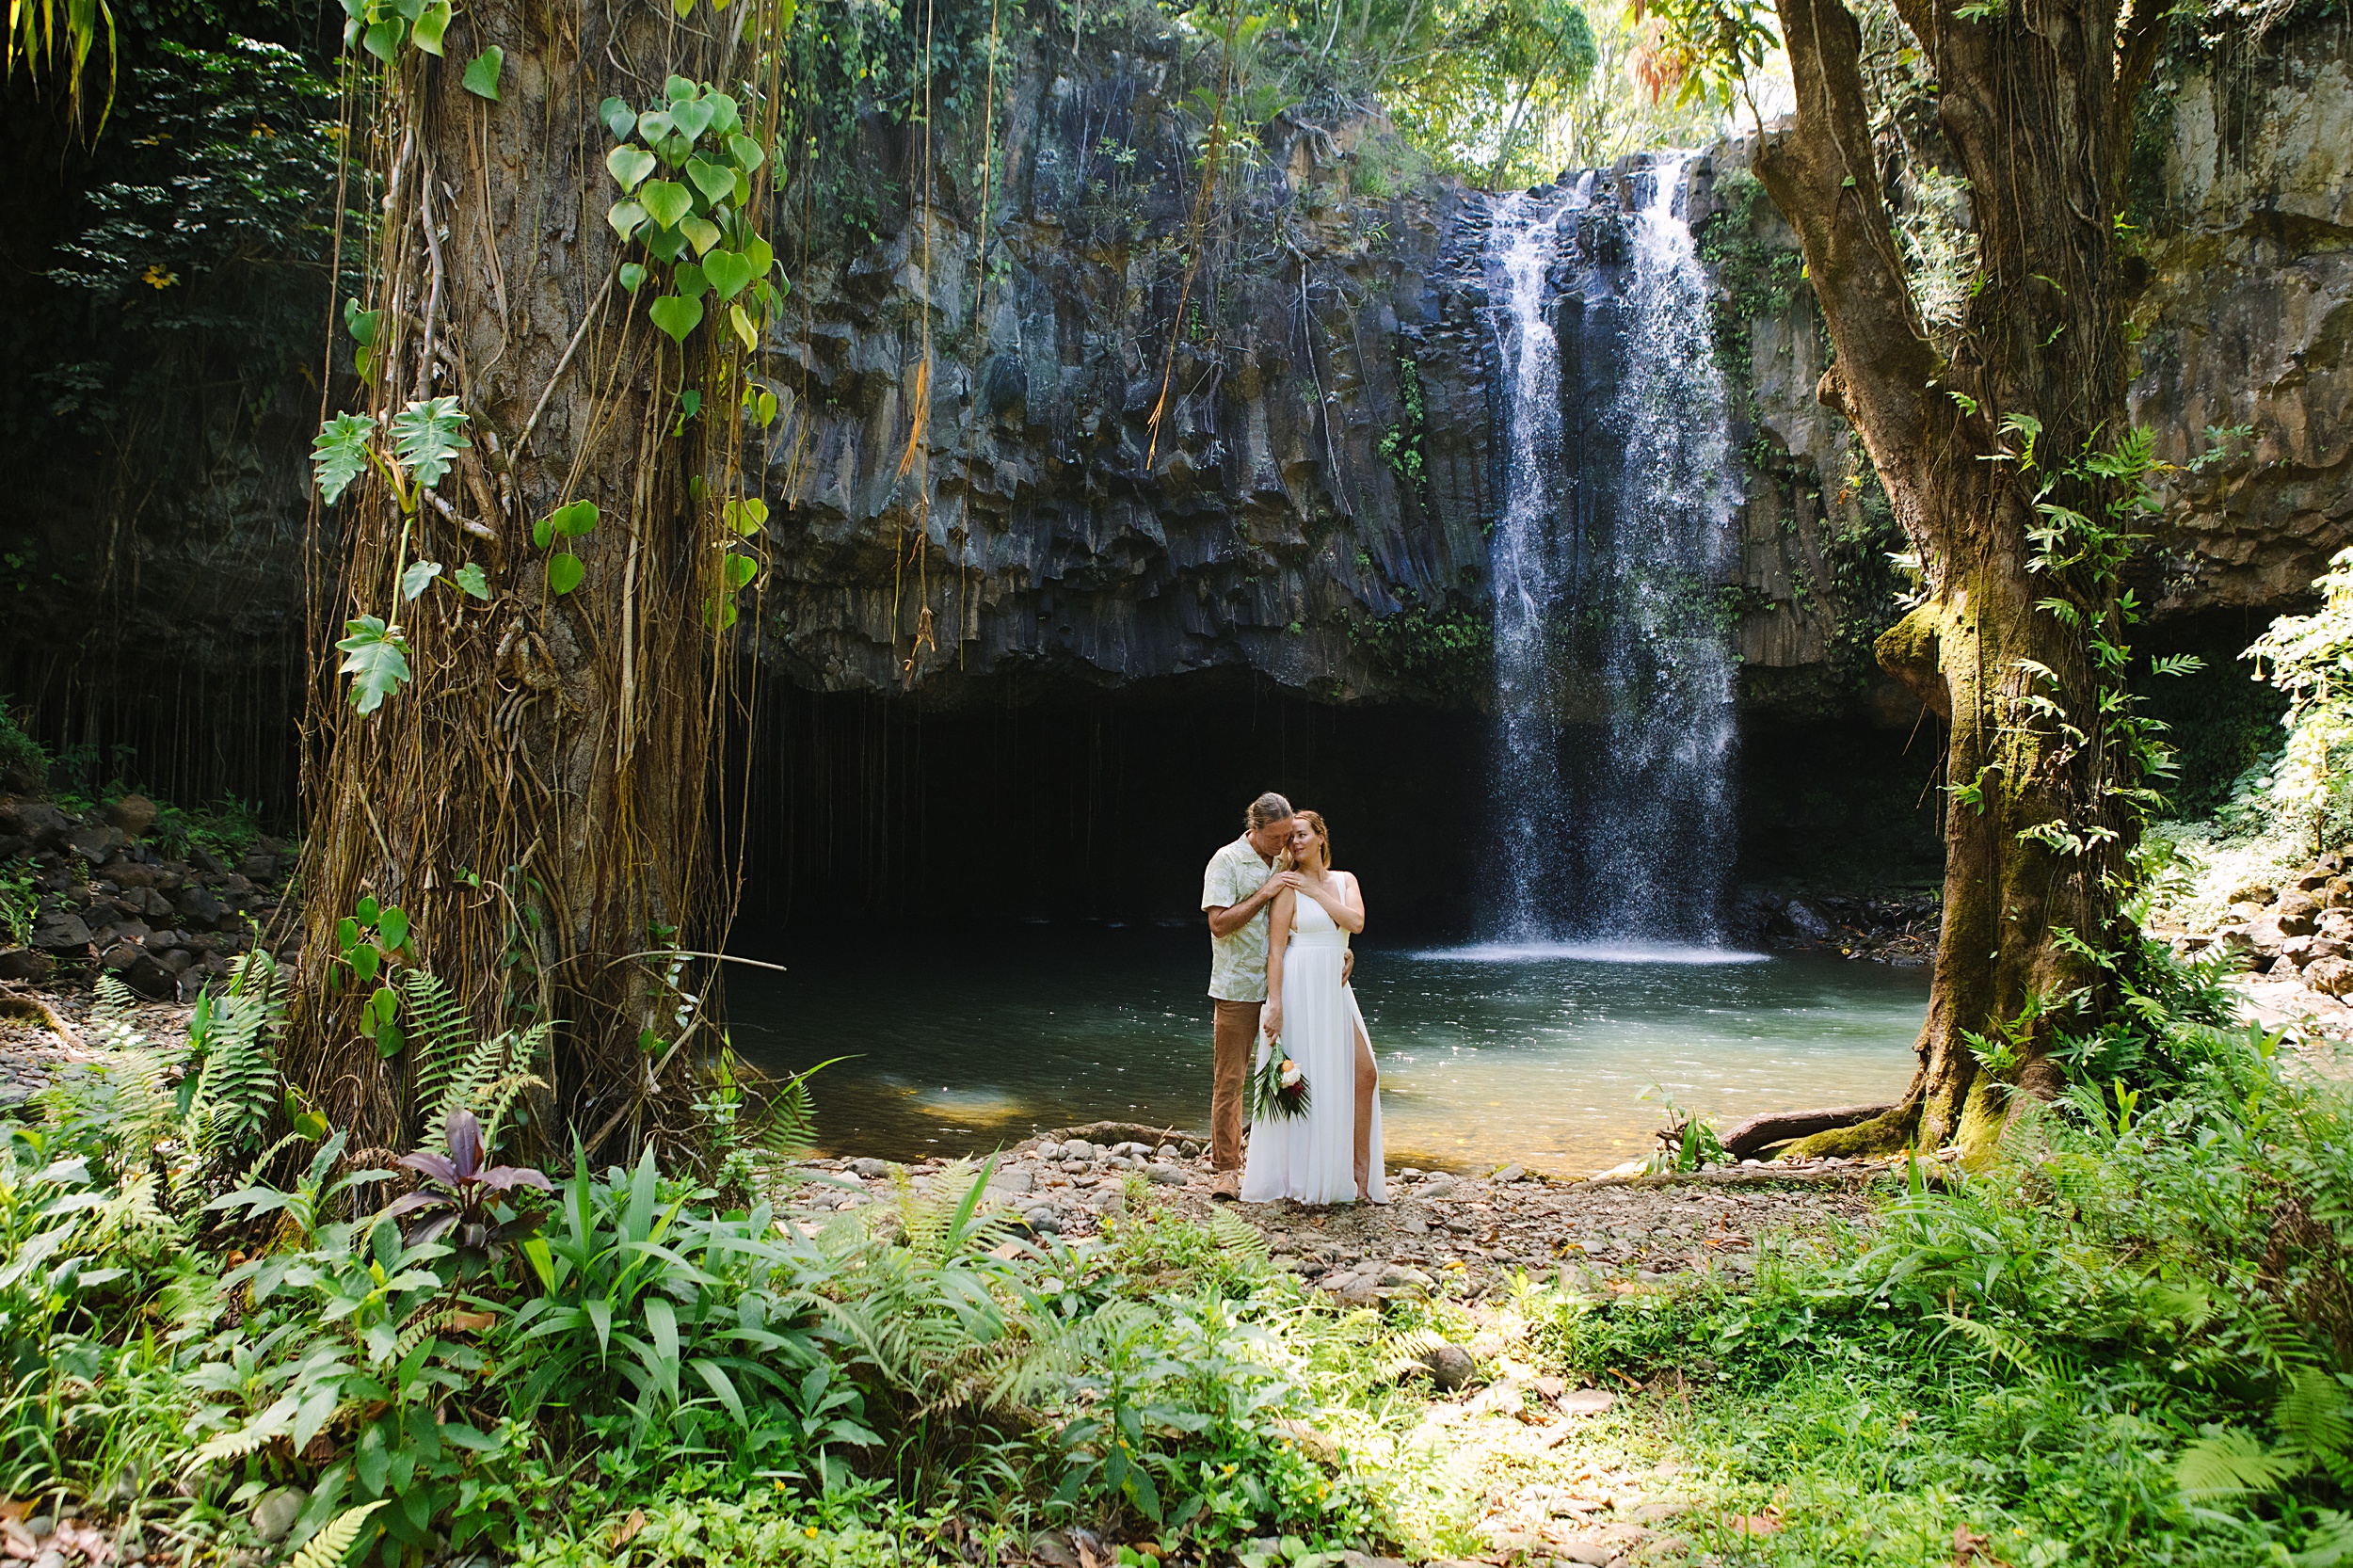 Talitha-and-Ted-41 Remarkable Private Maui, Hawaii Waterfall Elopement & Intimate Ceremony￼